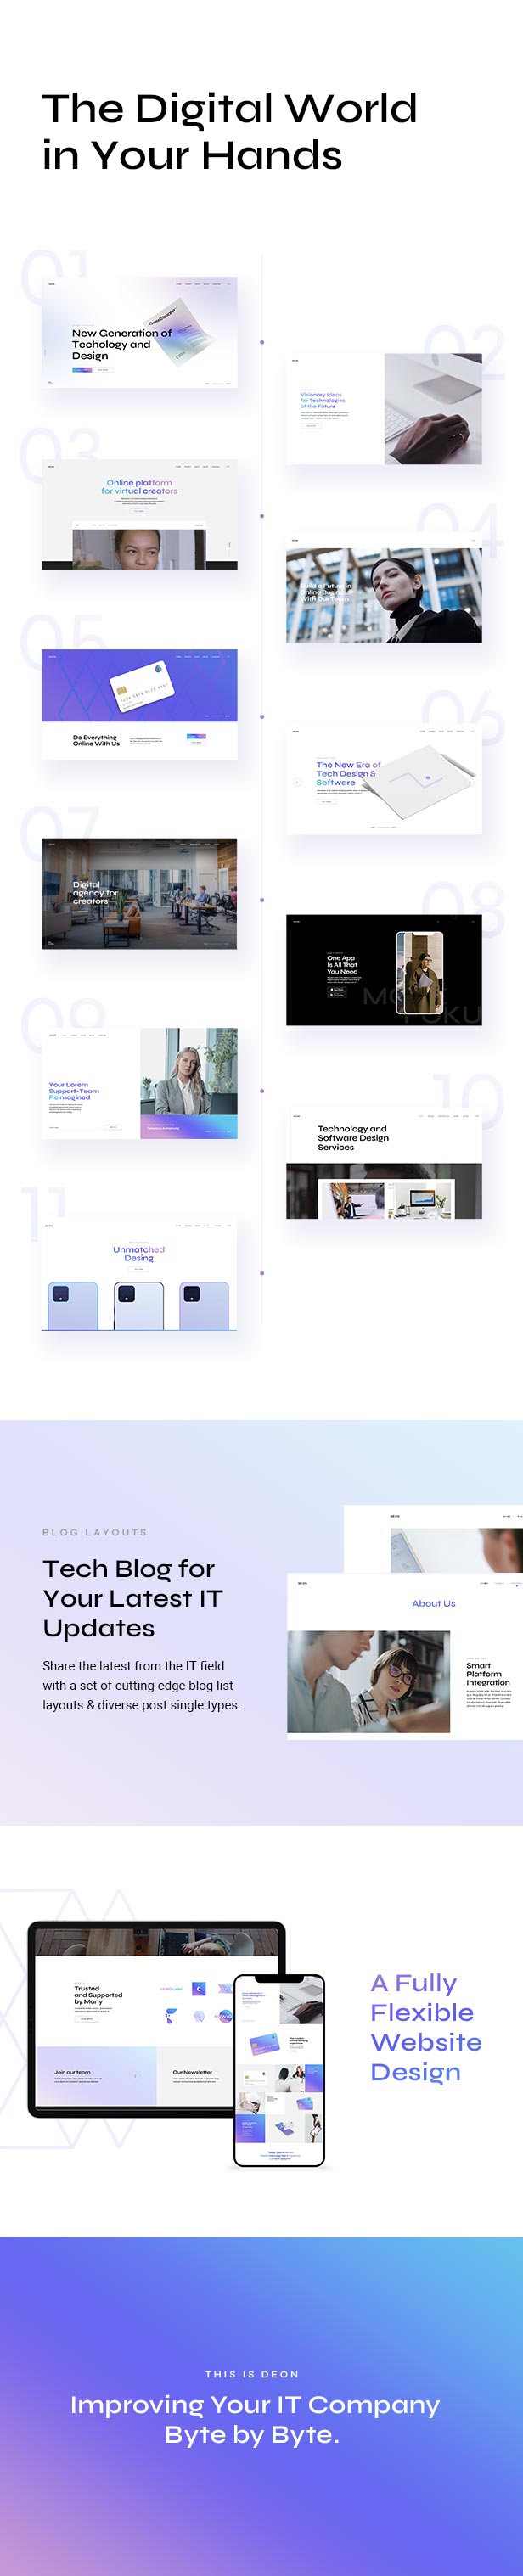 Deon - Technology and Software Company Theme - 1